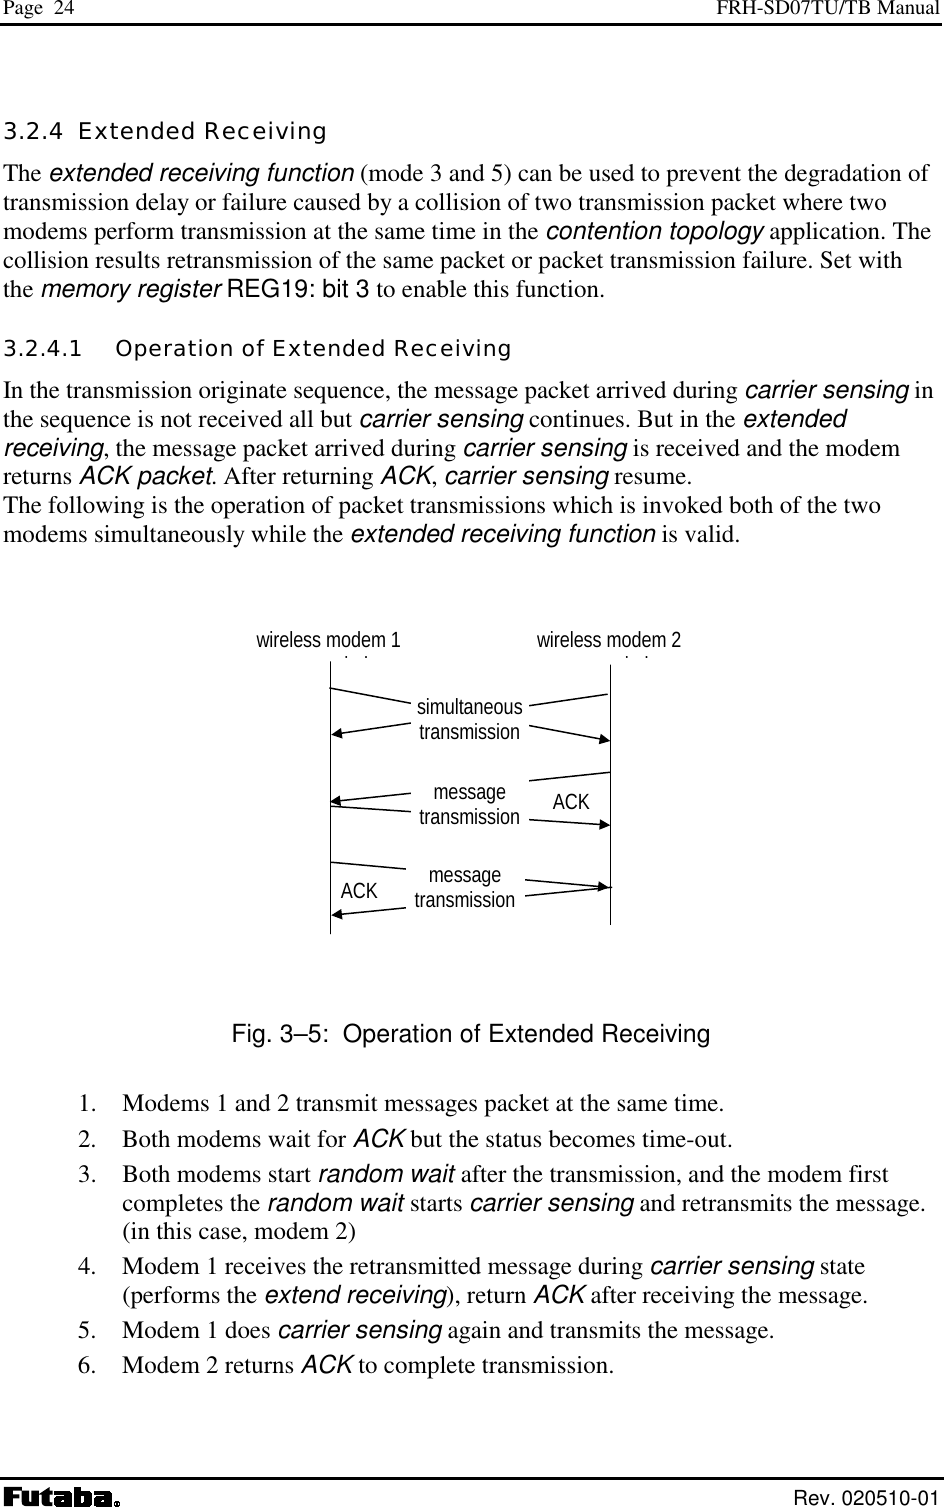 Page  24  FRH-SD07TU/TB Manual  Rev. 020510-01 3.2.4  Extended Receiving The extended receiving function (mode 3 and 5) can be used to prevent the degradation of  transmission delay or failure caused by a collision of two transmission packet where two modems perform transmission at the same time in the contention topology application. The collision results retransmission of the same packet or packet transmission failure. Set with the memory register REG19: bit 3 to enable this function. 3.2.4.1   Operation of Extended Receiving In the transmission originate sequence, the message packet arrived during carrier sensing in the sequence is not received all but carrier sensing continues. But in the extended receiving, the message packet arrived during carrier sensing is received and the modem returns ACK packet. After returning ACK, carrier sensing resume. The following is the operation of packet transmissions which is invoked both of the two modems simultaneously while the extended receiving function is valid.  Fig. 3–5:  Operation of Extended Receiving 1.   Modems 1 and 2 transmit messages packet at the same time. 2.   Both modems wait for ACK but the status becomes time-out. 3.   Both modems start random wait after the transmission, and the modem first completes the random wait starts carrier sensing and retransmits the message. (in this case, modem 2) 4.   Modem 1 receives the retransmitted message during carrier sensing state (performs the extend receiving), return ACK after receiving the message. 5.   Modem 1 does carrier sensing again and transmits the message. 6.   Modem 2 returns ACK to complete transmission.  message transmissionmessage transmissionsimultaneous transmissionwireless modem 2 ilwireless modem 1 ilACK ACK  